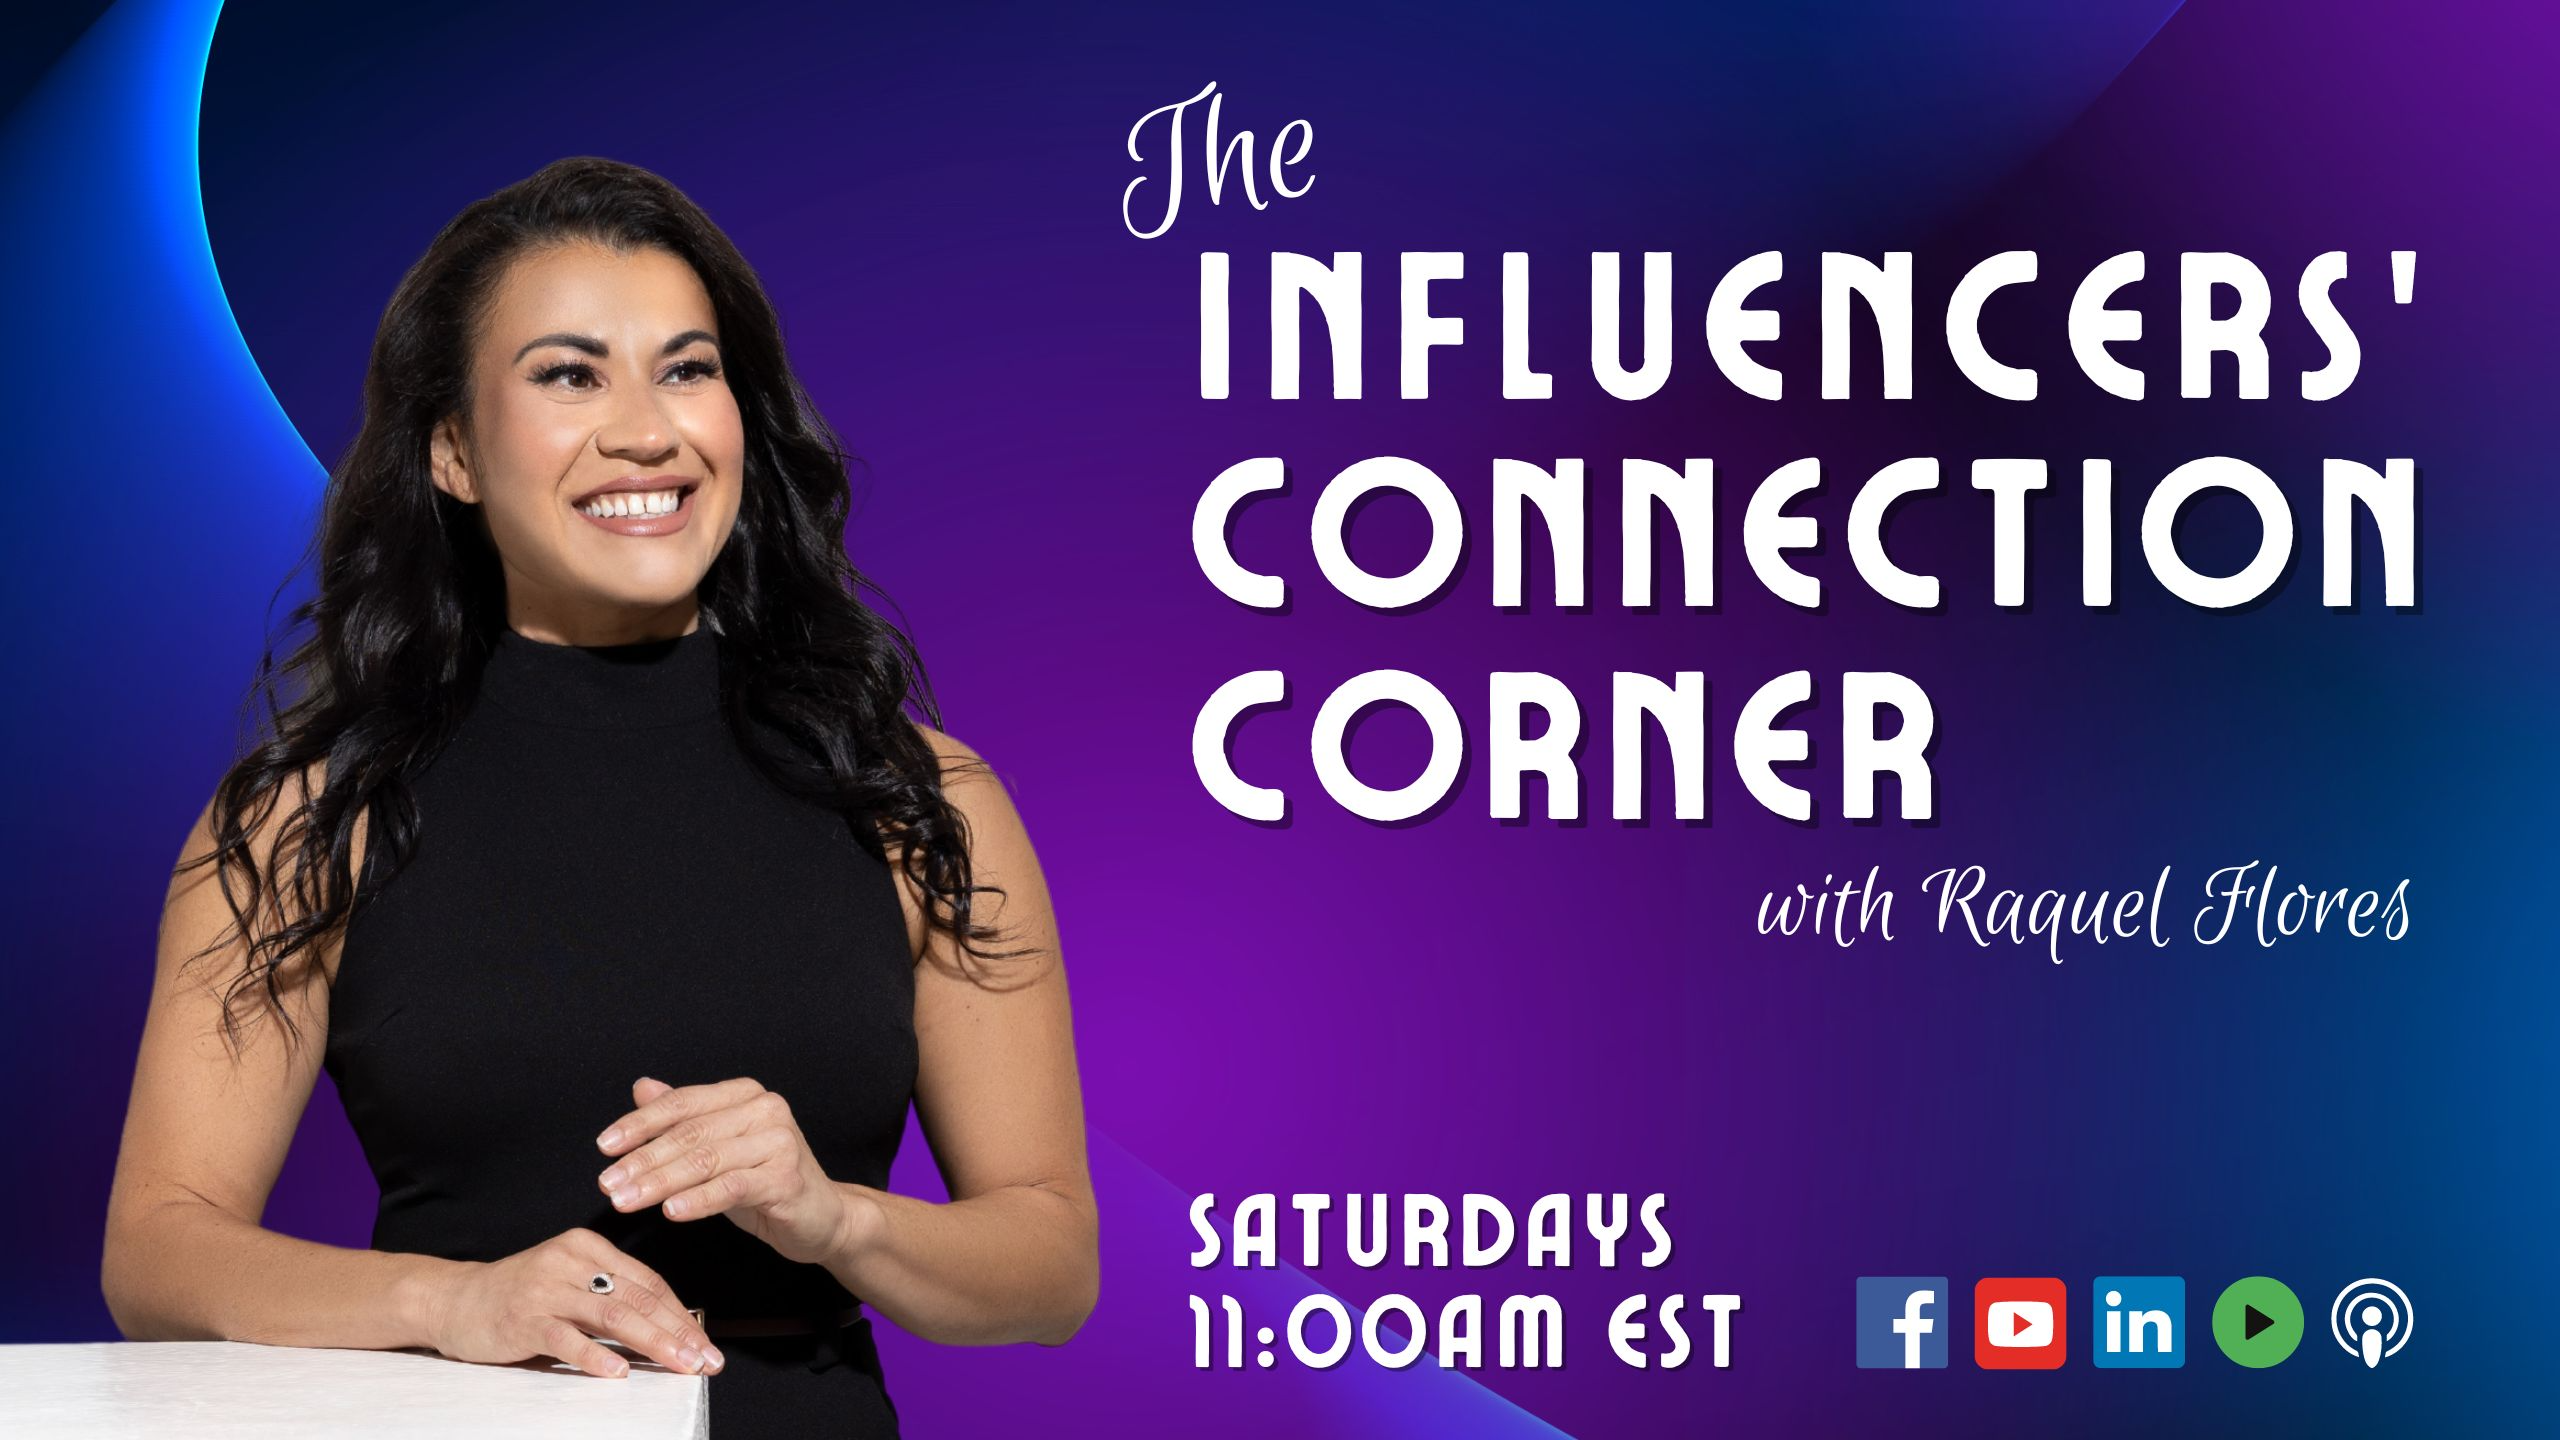 The Influencers' Connection Corner